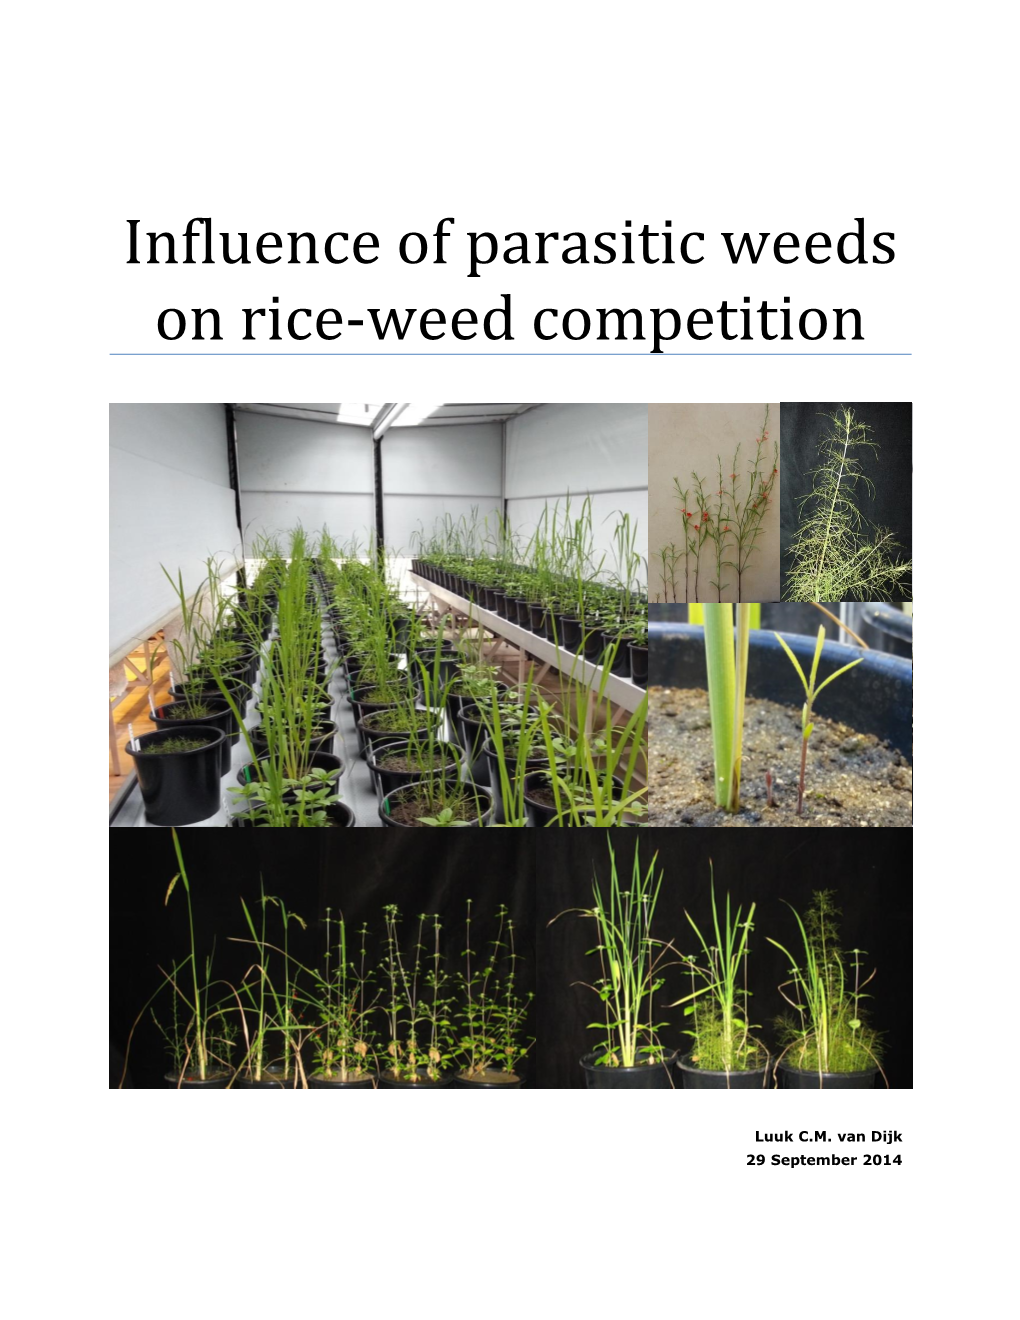 Influence of Parasitic Weeds on Rice-Weed Competition